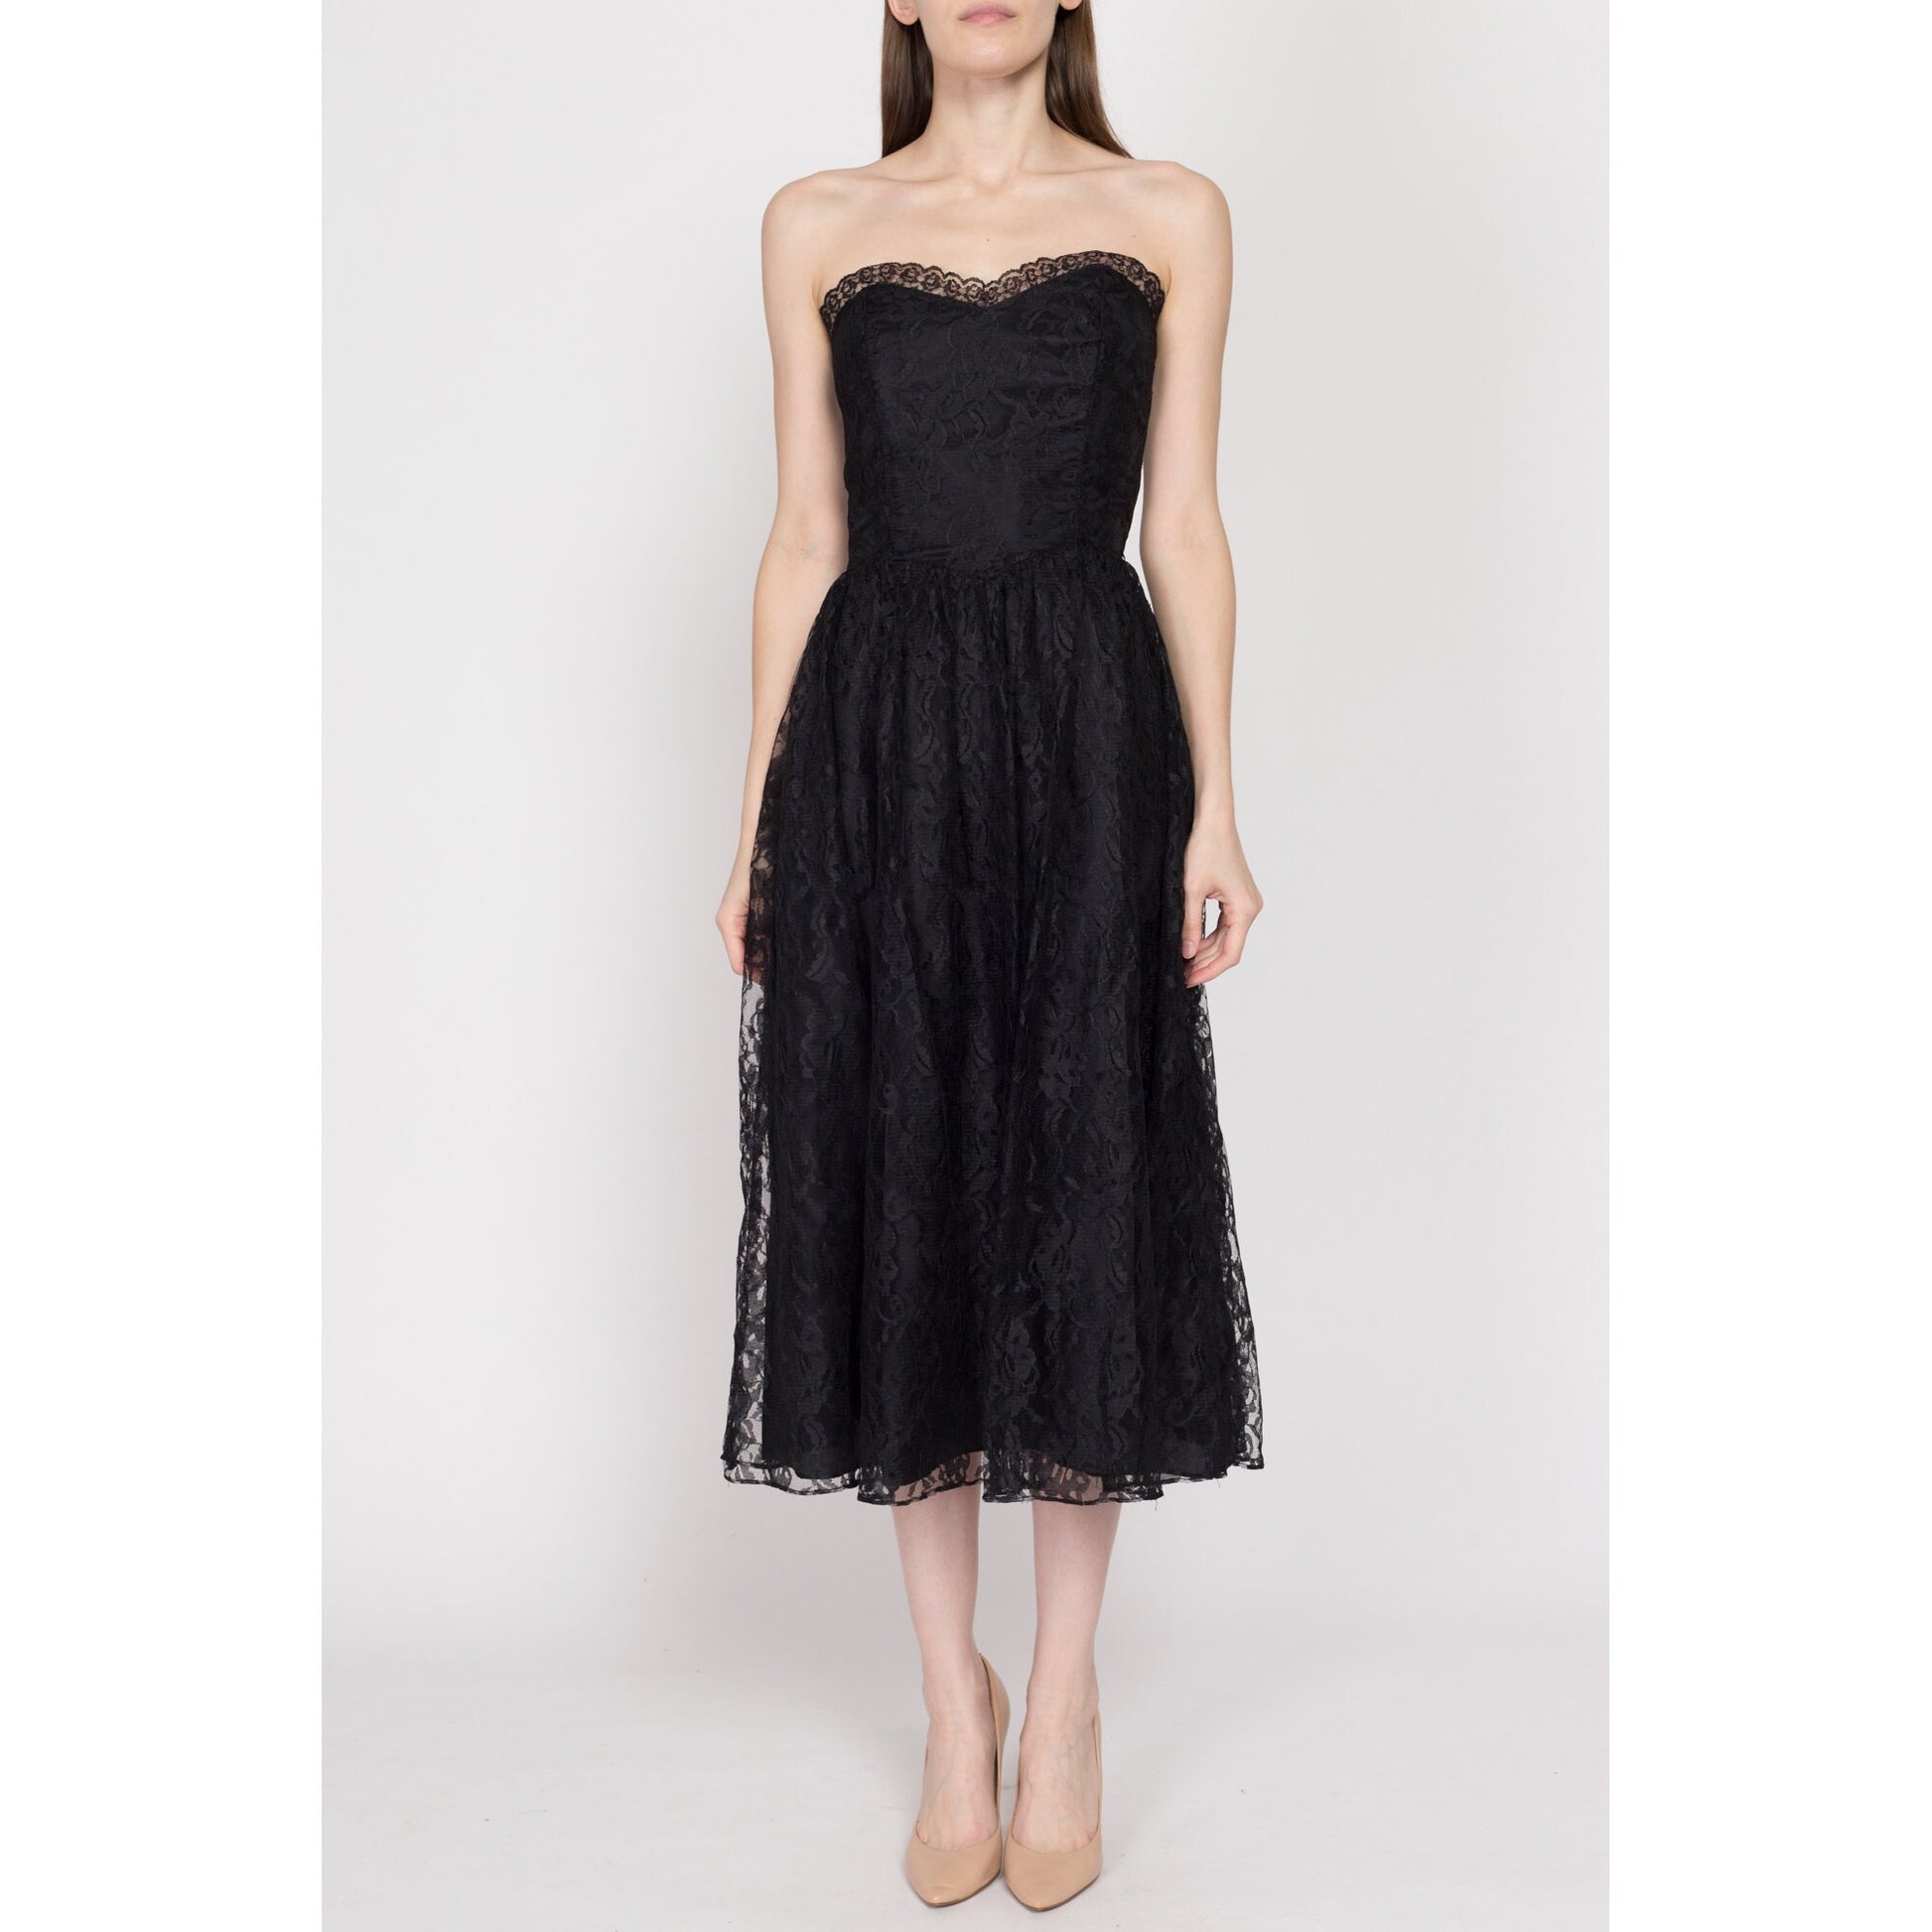 XS-Sm 80s Black Lace Strapless Party Dress | Vintage Fit & Flare Gothic Formal Midi Dress